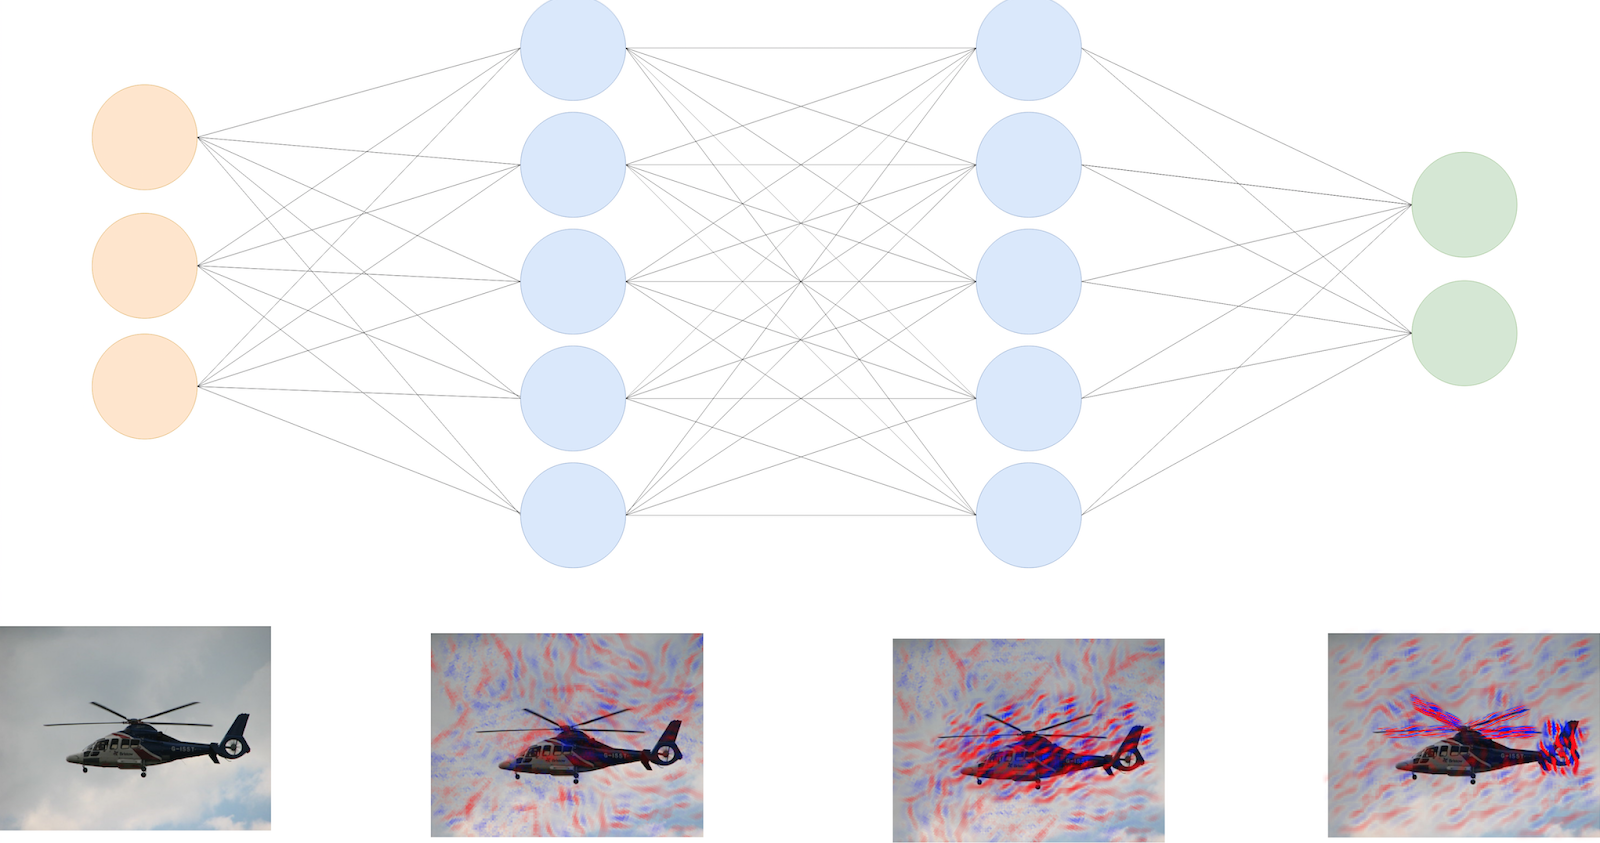 (Fig. 1 - A view of what is discovered at each layer by the neural network)